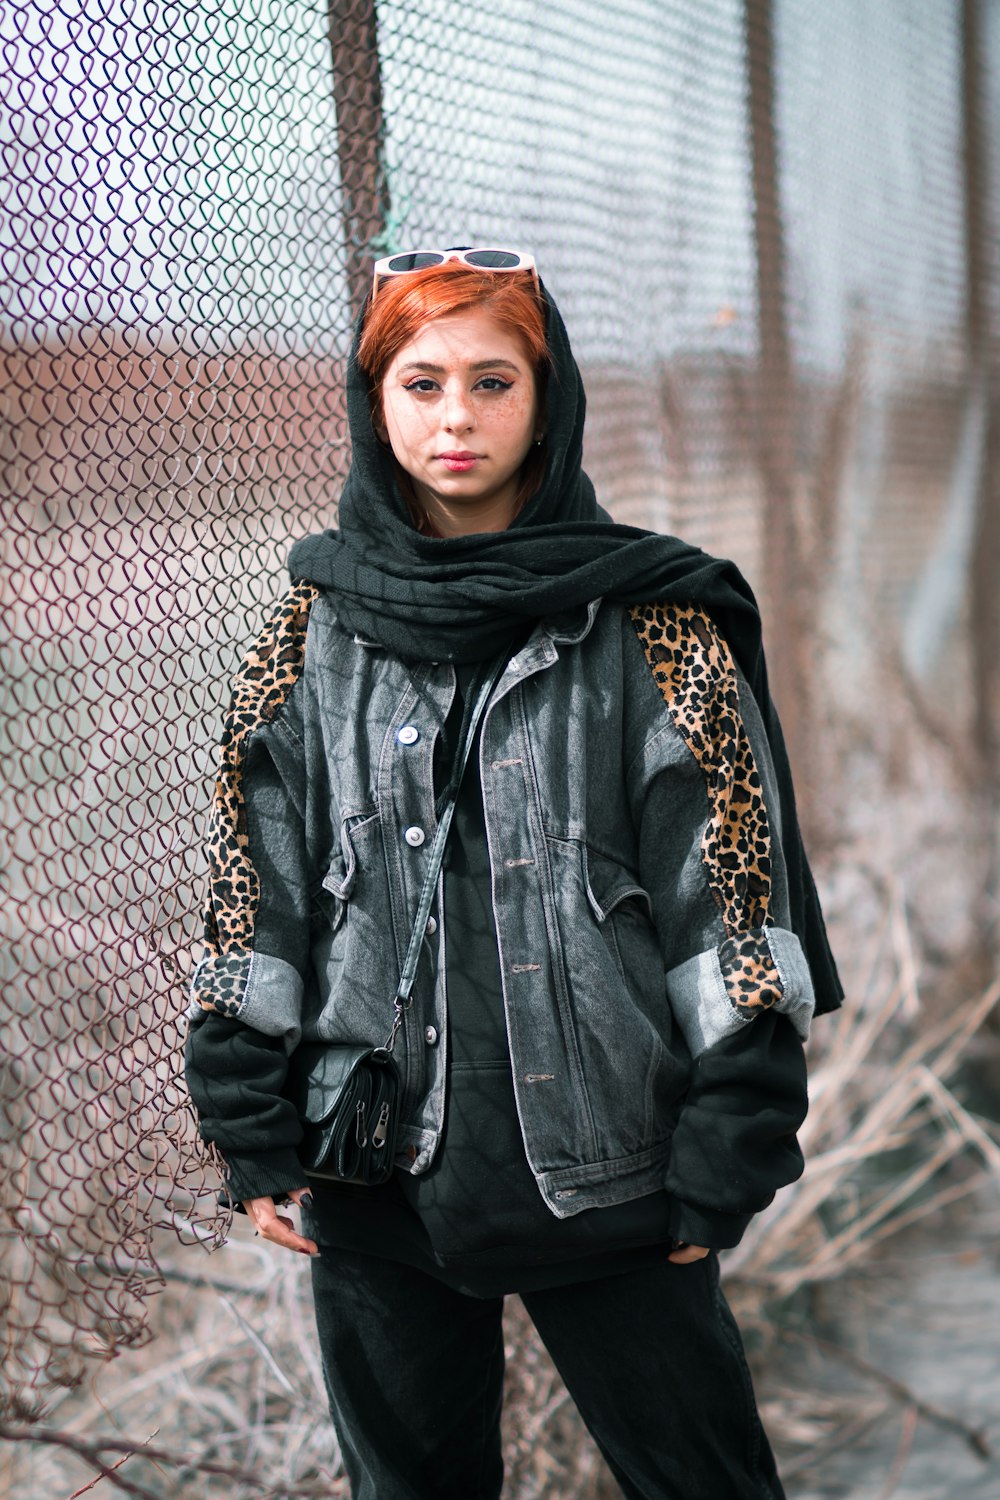 woman in black leather jacket standing beside chain link fence